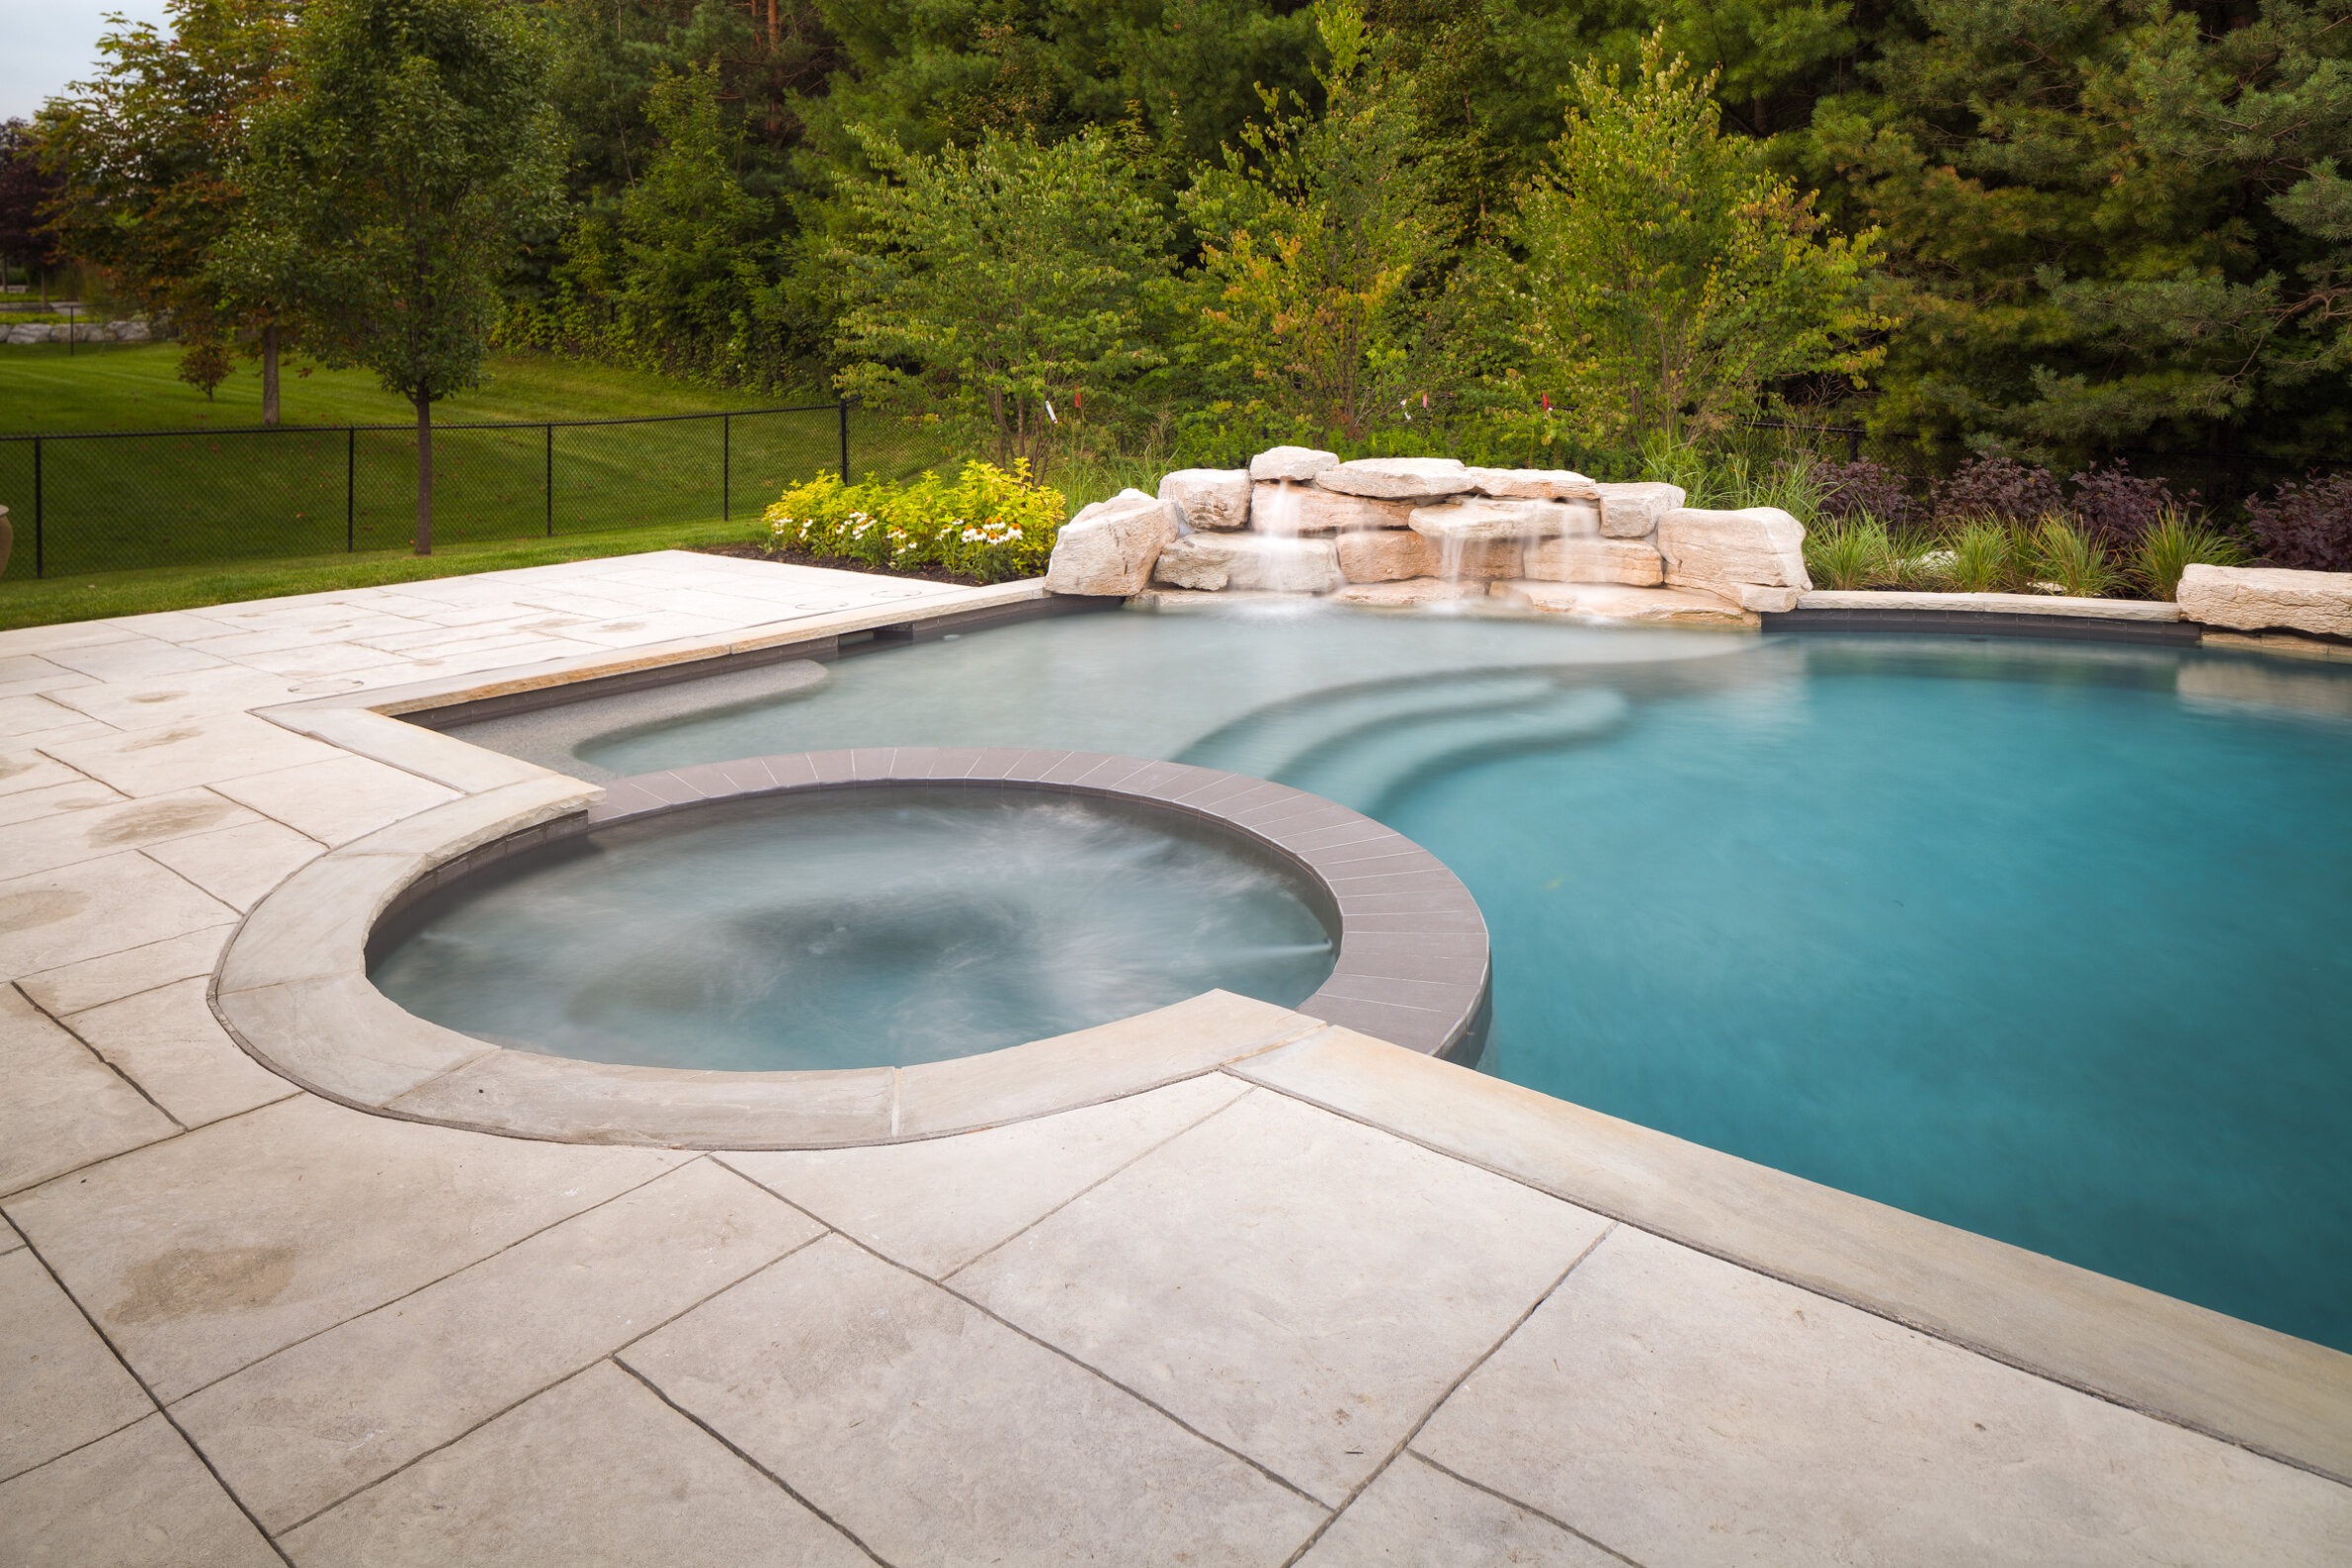 An outdoor swimming pool with an integrated circular hot tub, stone waterfall, surrounded by a patio and landscaping, with a fence in the background.